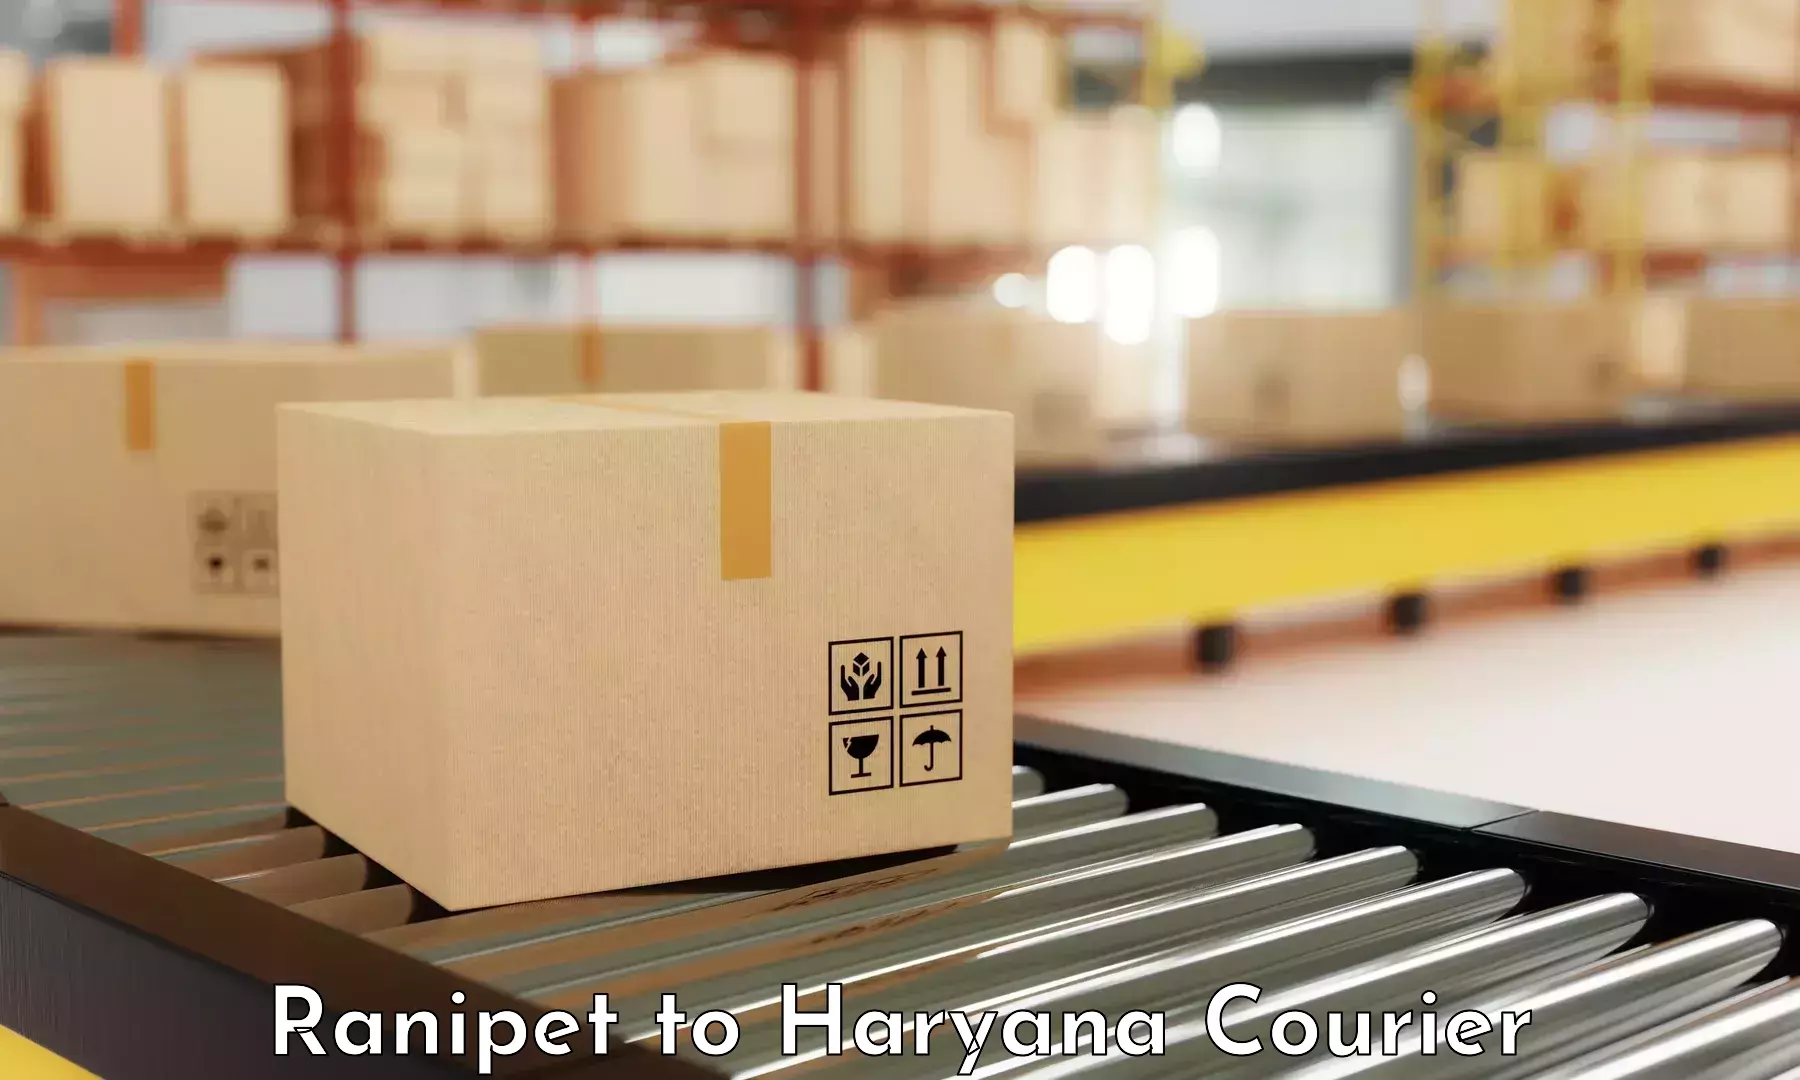 Nationwide delivery network Ranipet to Panchkula